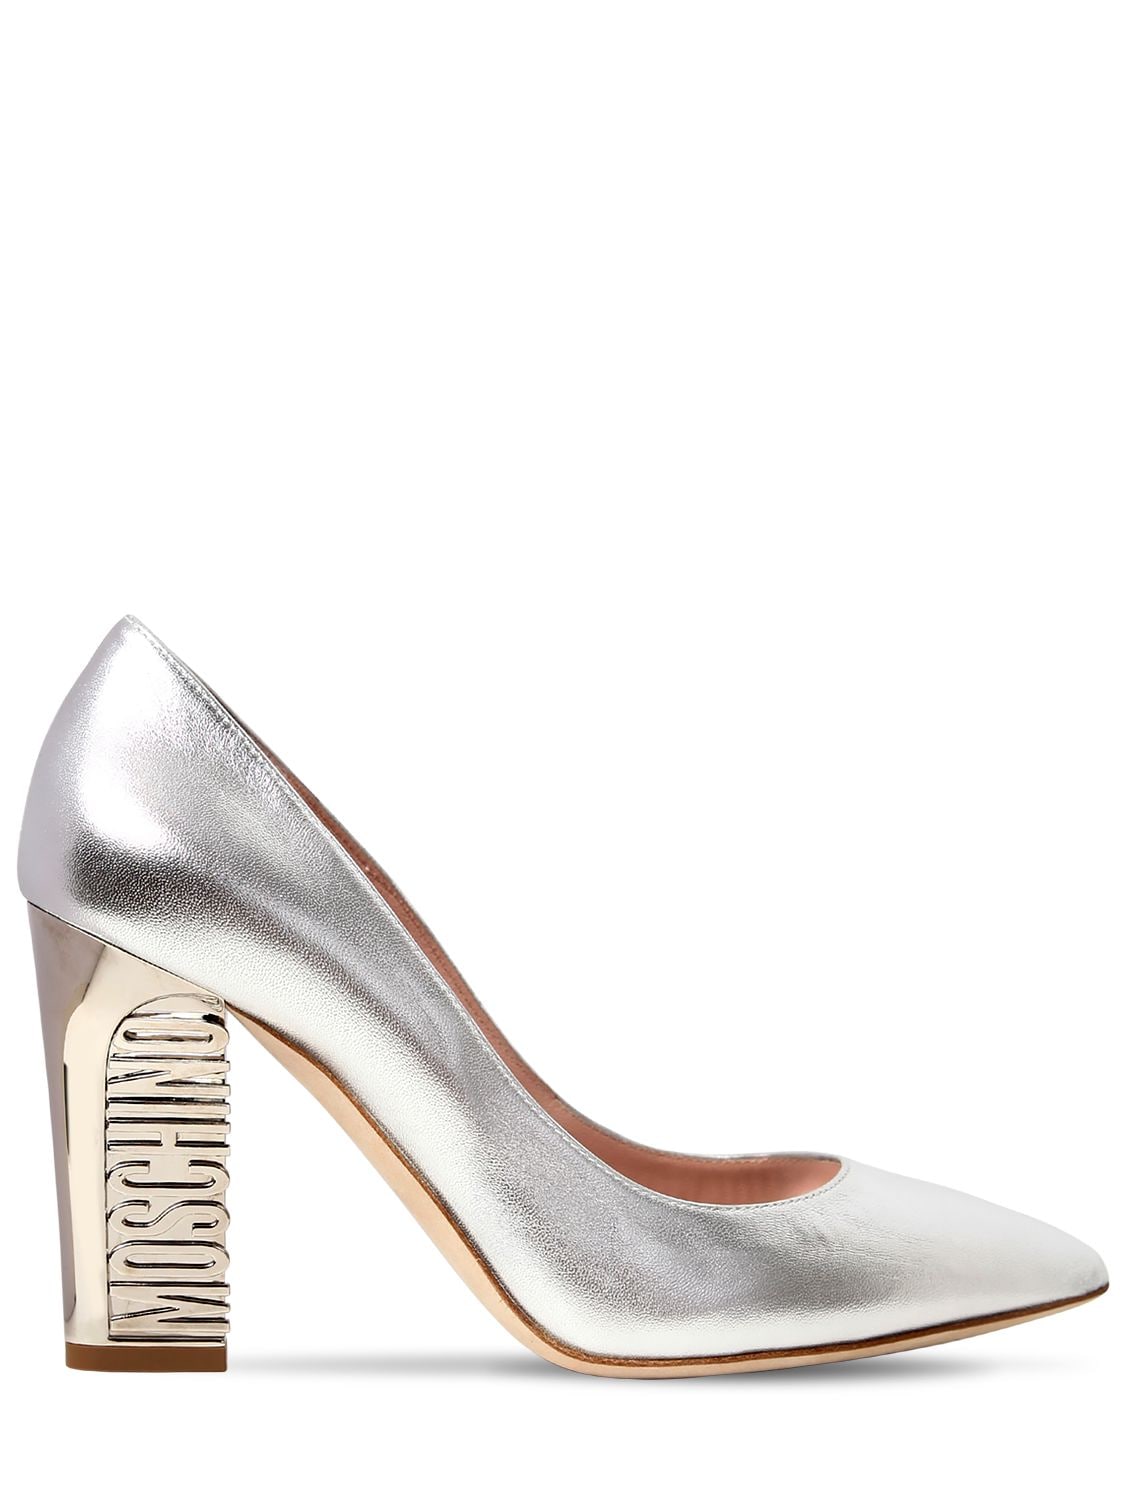 Moschino 100mm Logo Heel Metallic Leather Pumps In Silver